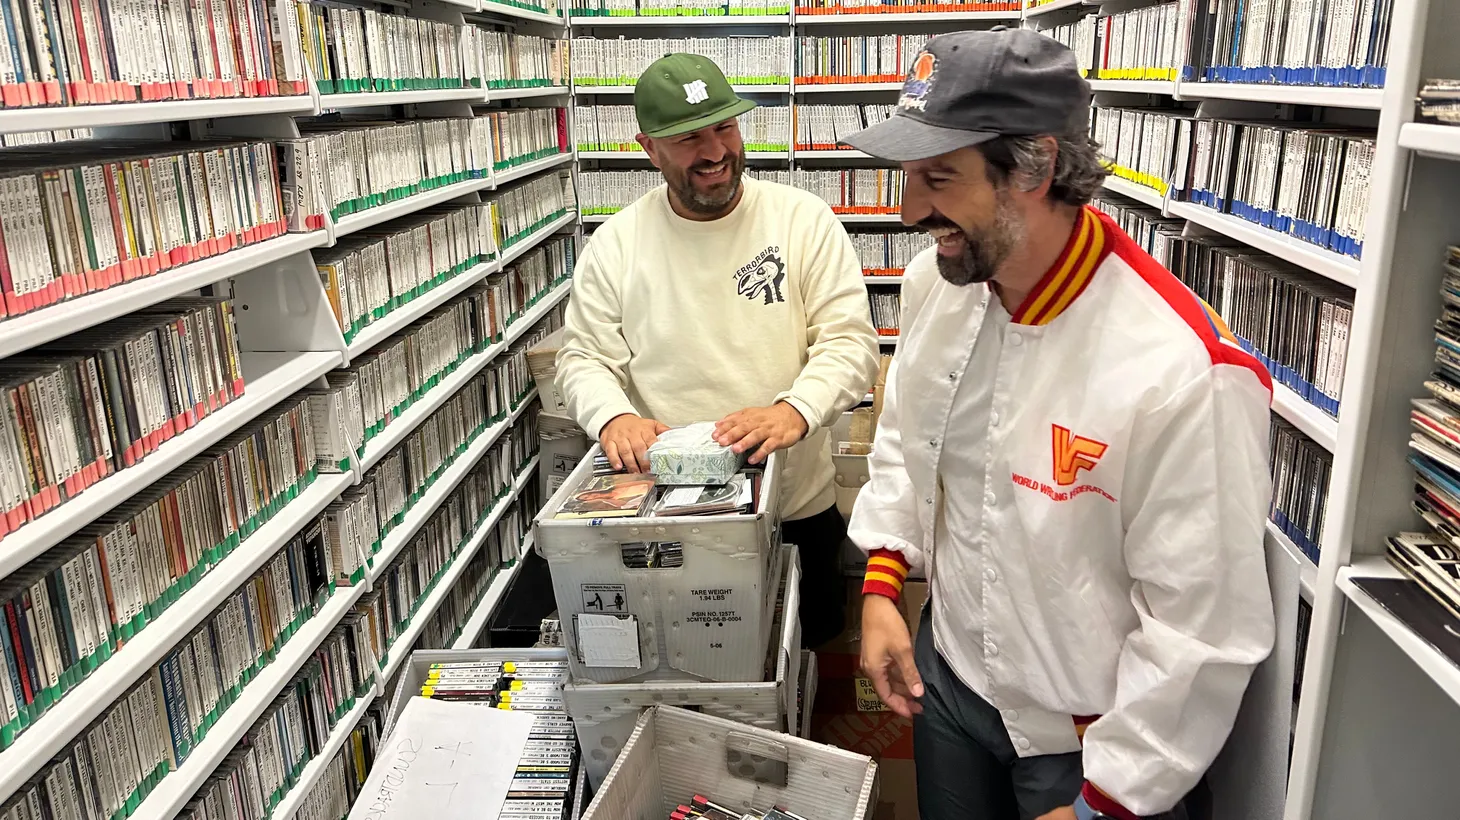 Give us a “K,” give us a “C,” give us a… you get where this is going. Anthony Valadez and Nassir Nassirzadeh get sports-nostalgic at KCRW HQ.